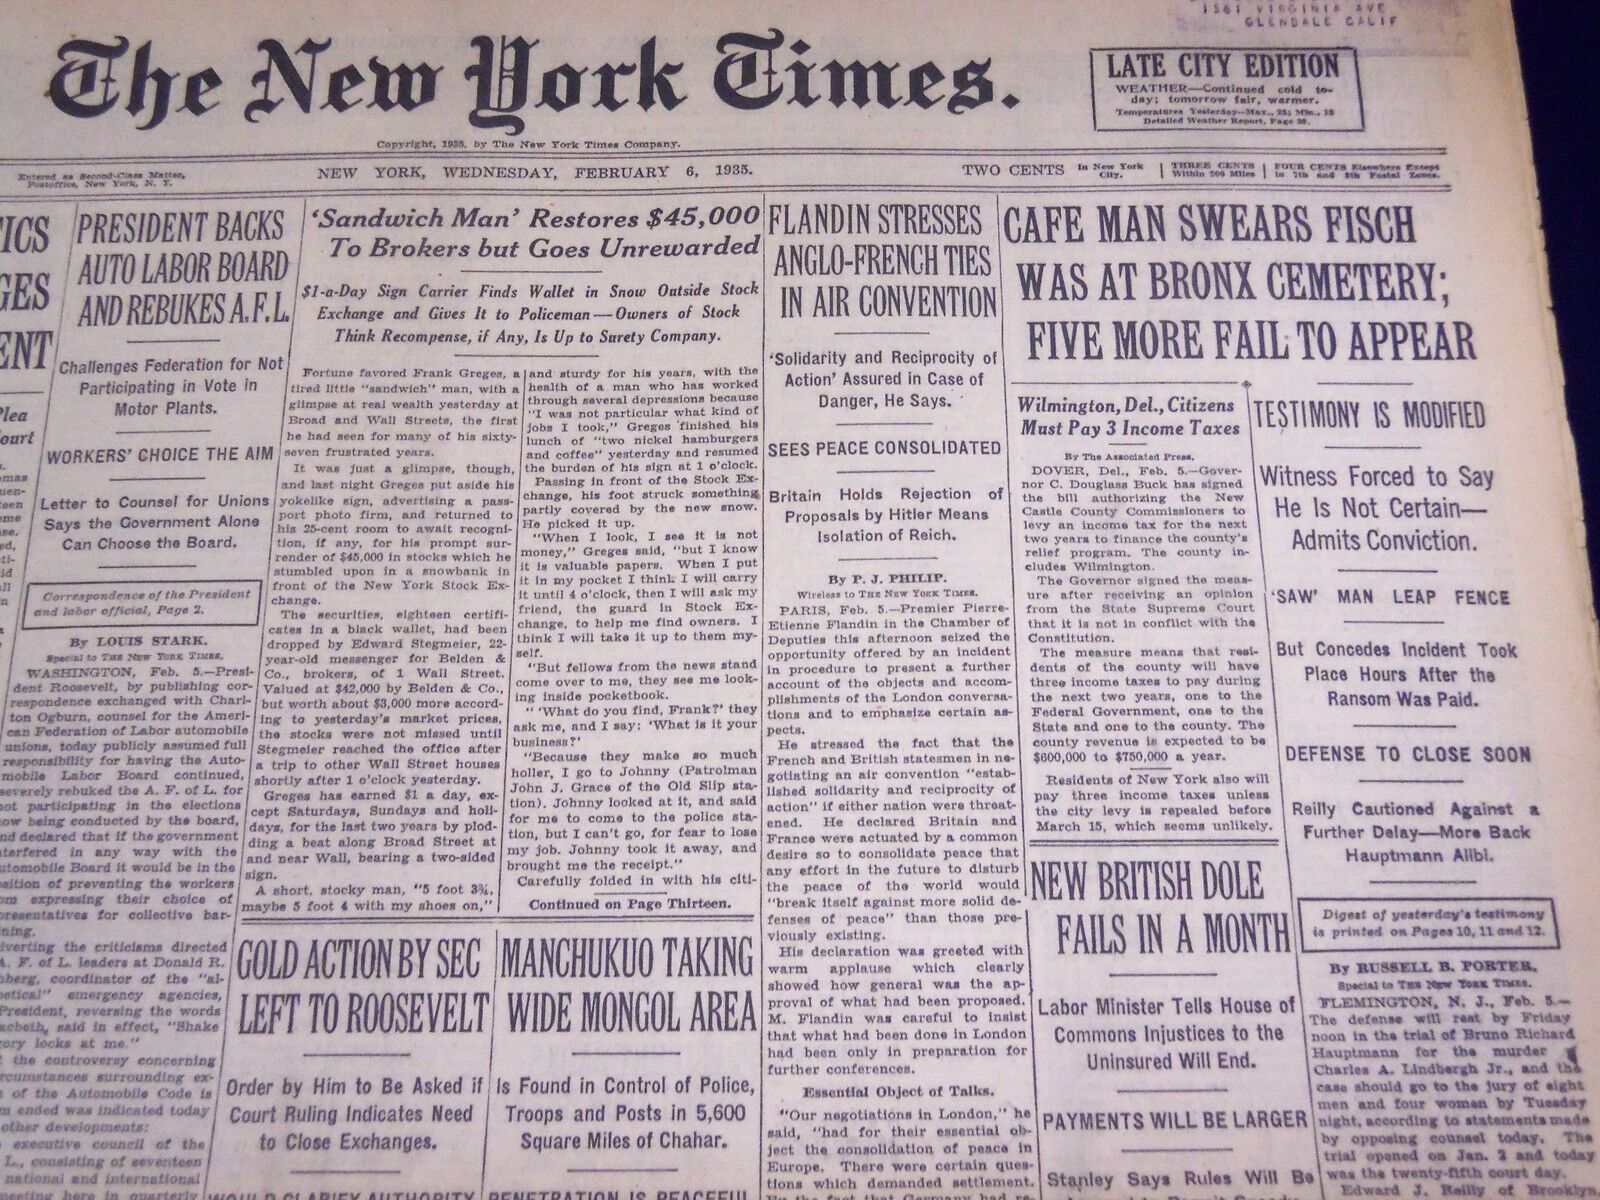 1935 FEB 6 NEW YORK TIMES - CAFE MAN SWEARS FISCH WAS AT BRONX CEMETARY- NT 1920